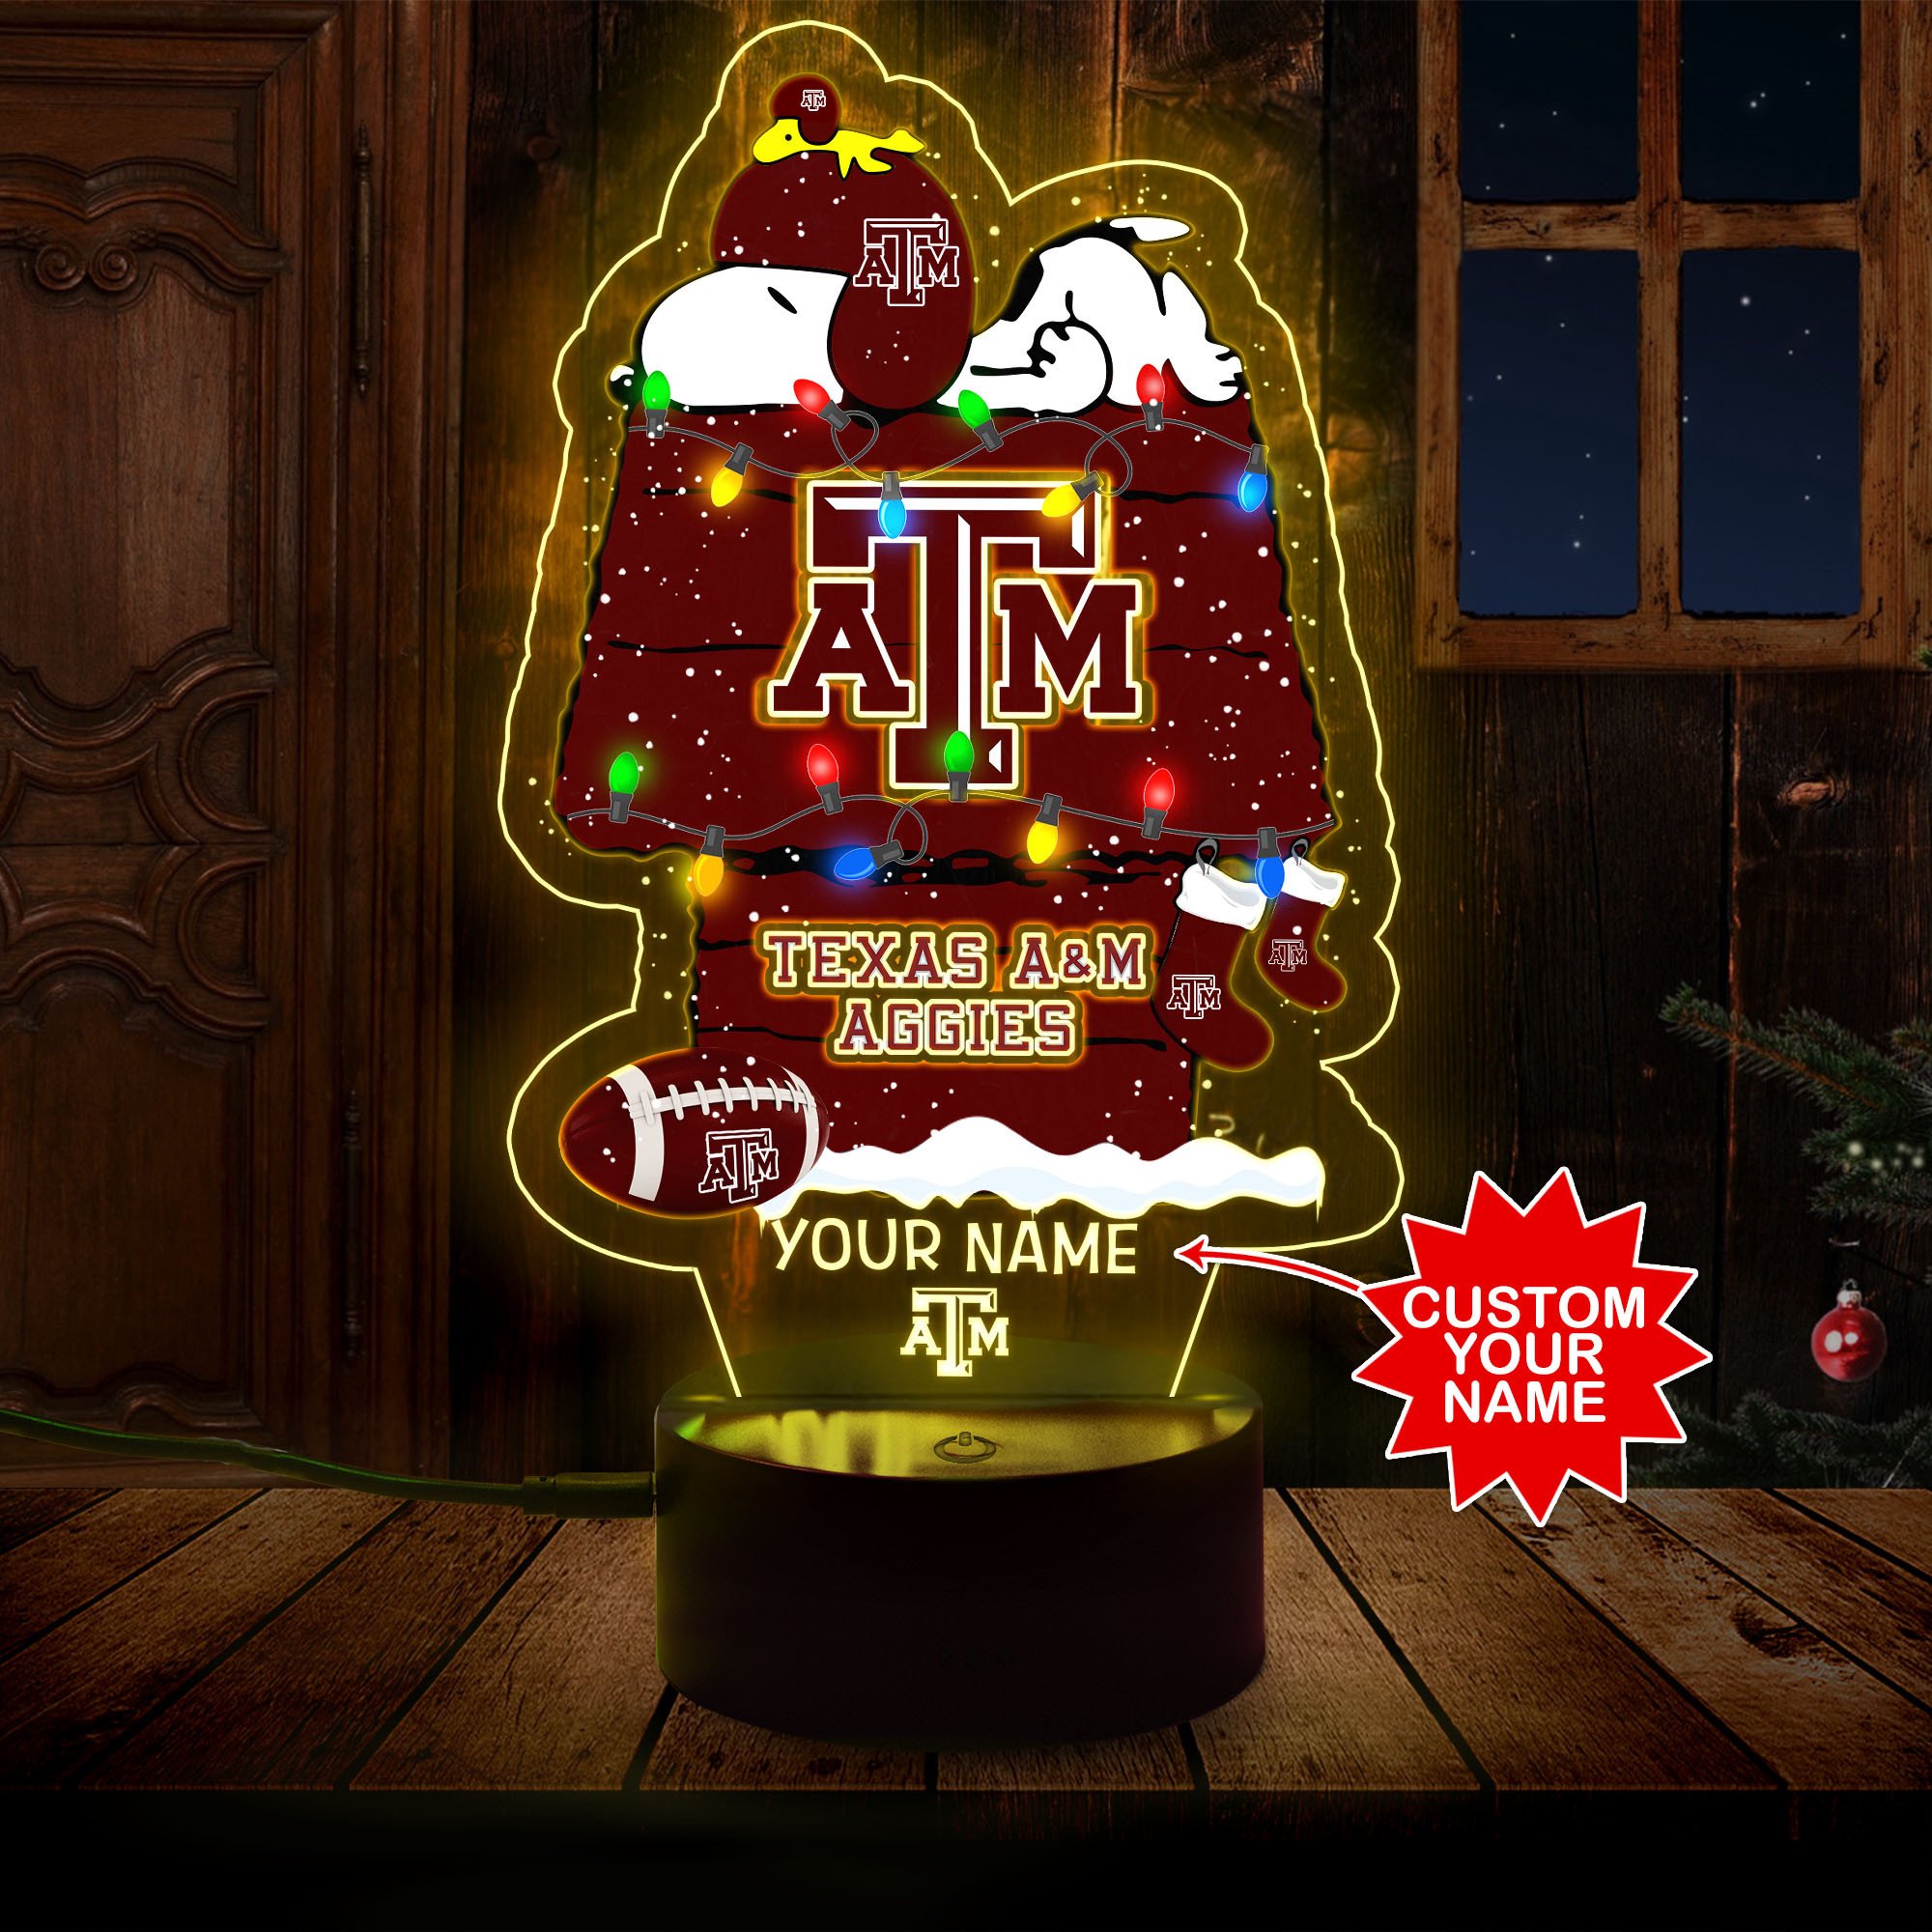 Personalized_NCAA_Texas_ATM_Aggies_Led_Lamp